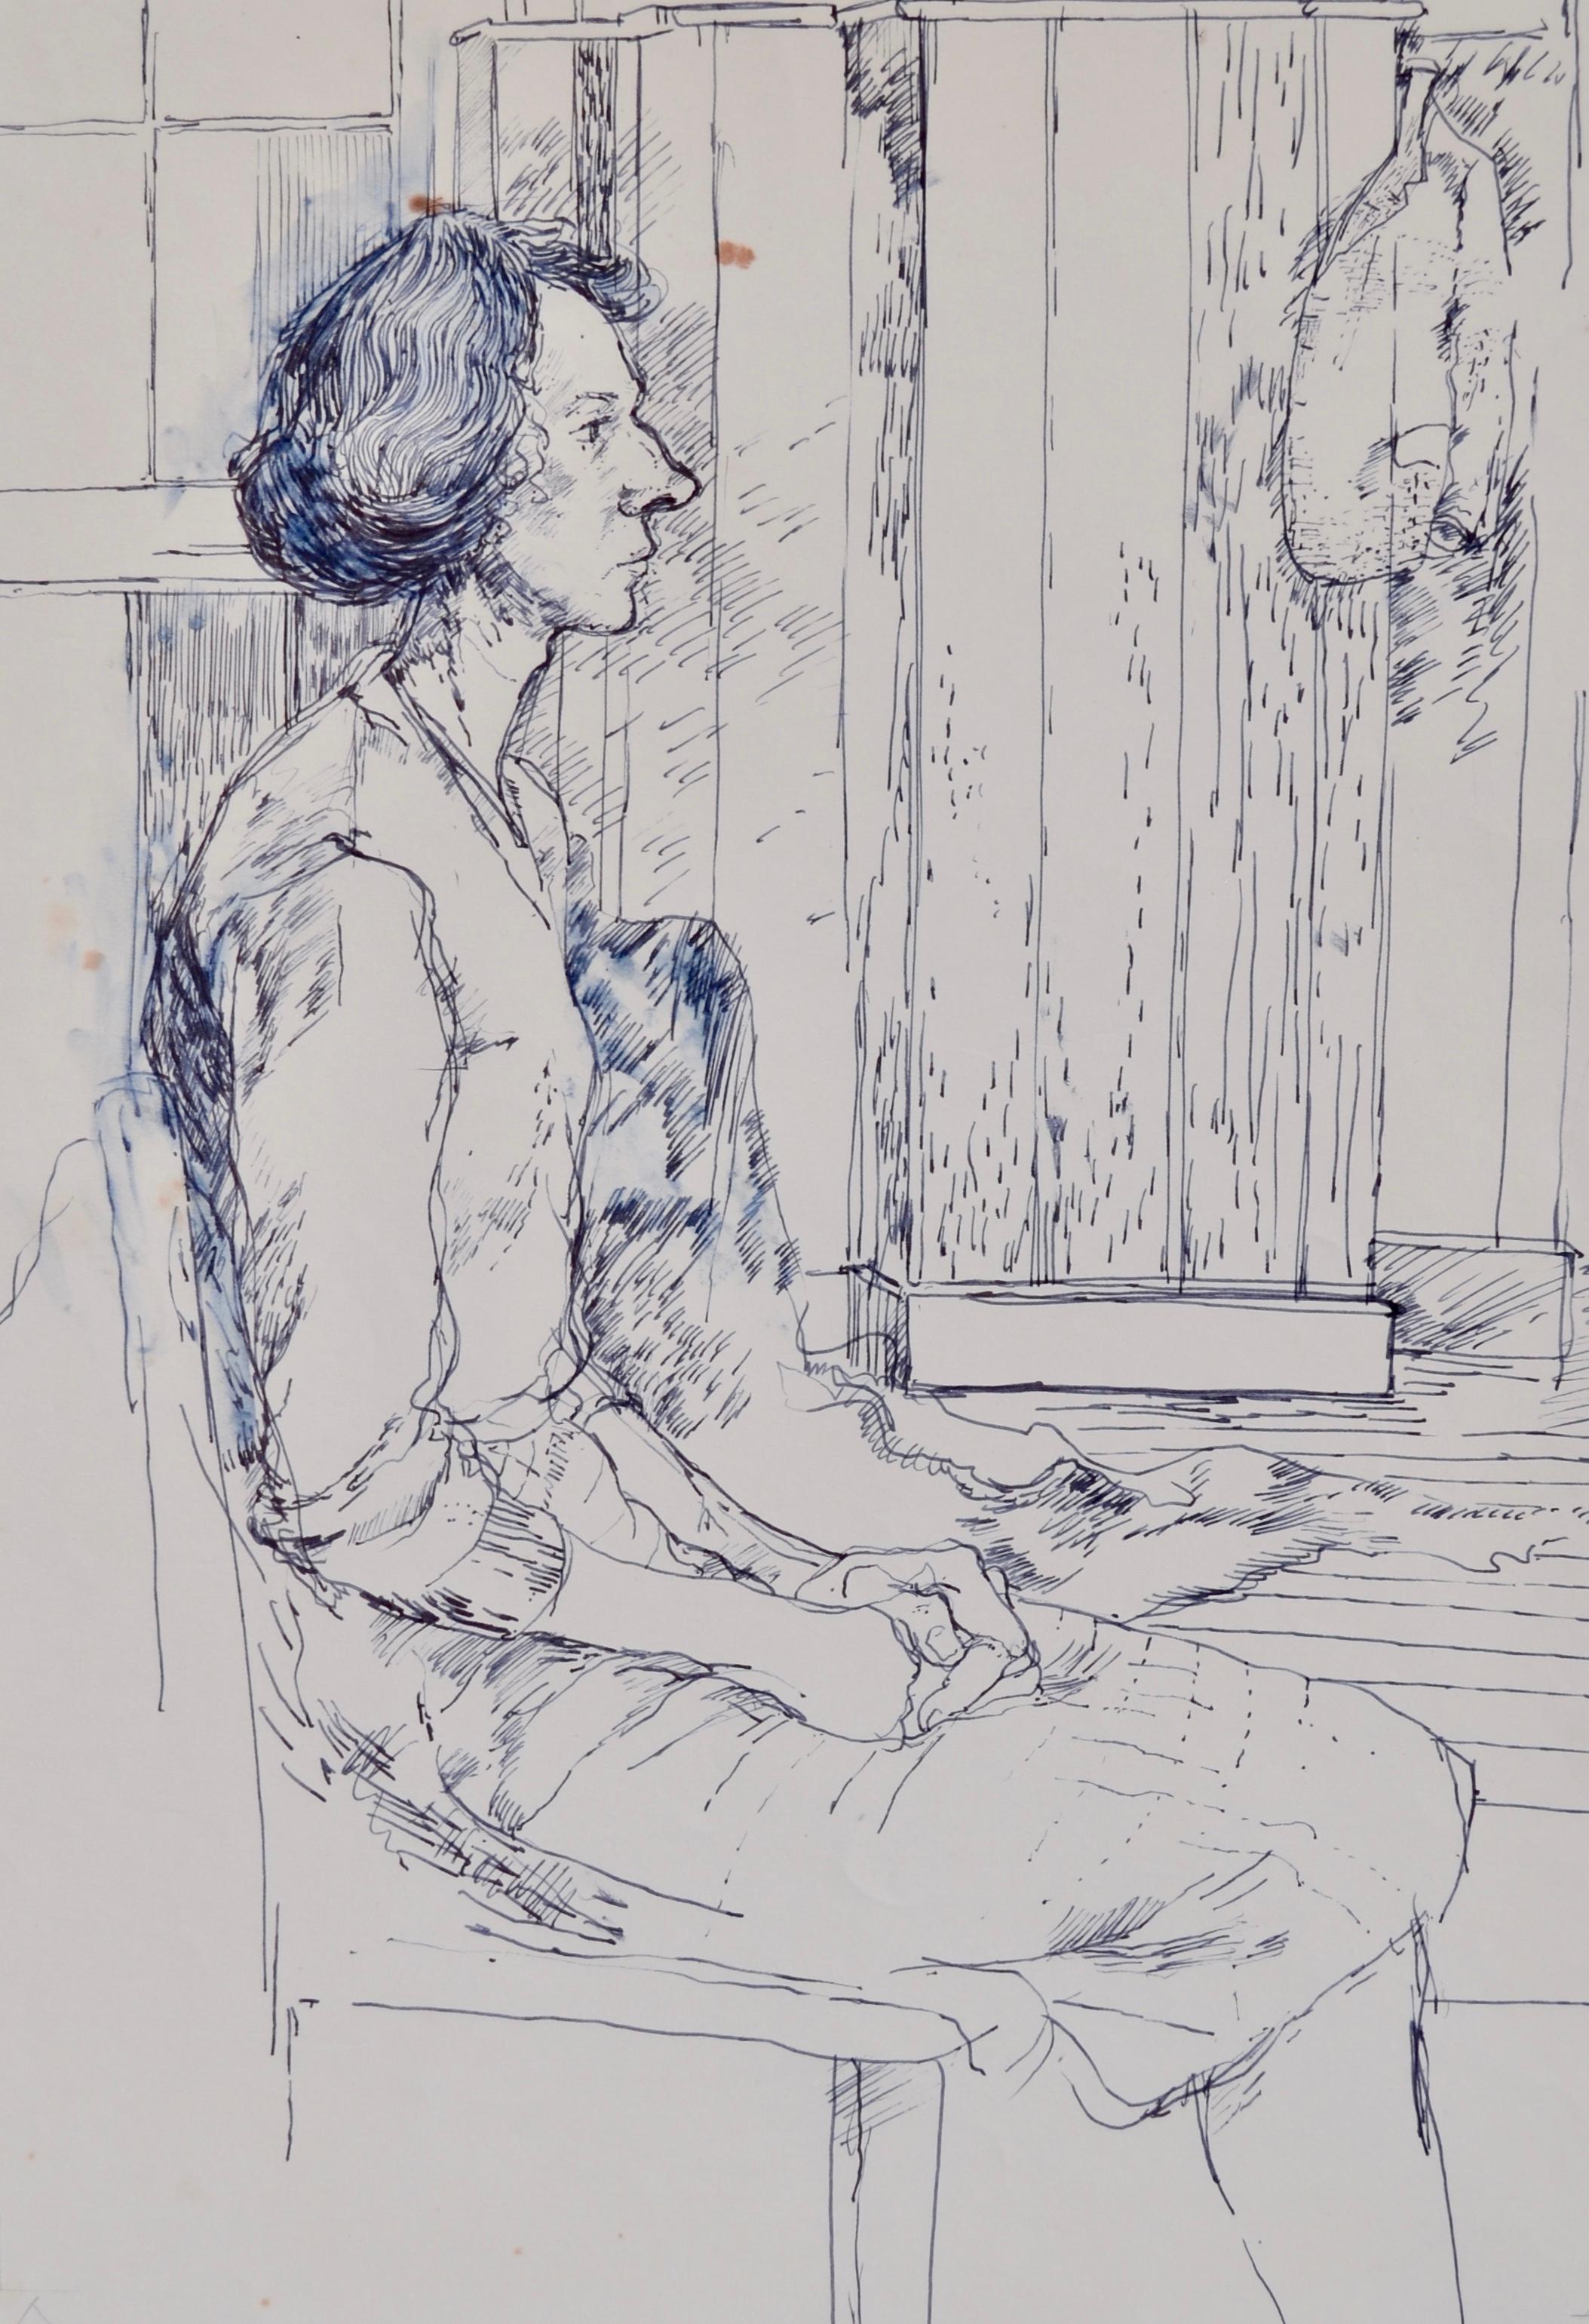 CAROLYN SERGEANT
(1937-2018)

Seated Woman in Profile

Pen and ink with wash, unframed

45.5 by 32 cm., 18 by 12 ½ in. 
(mount size 62 by 47 cm., 24 ½ by 18 ½ in.)

Carolyn Cann studied at Wimbledon School of Art (1955-59) and at the Royal Academy